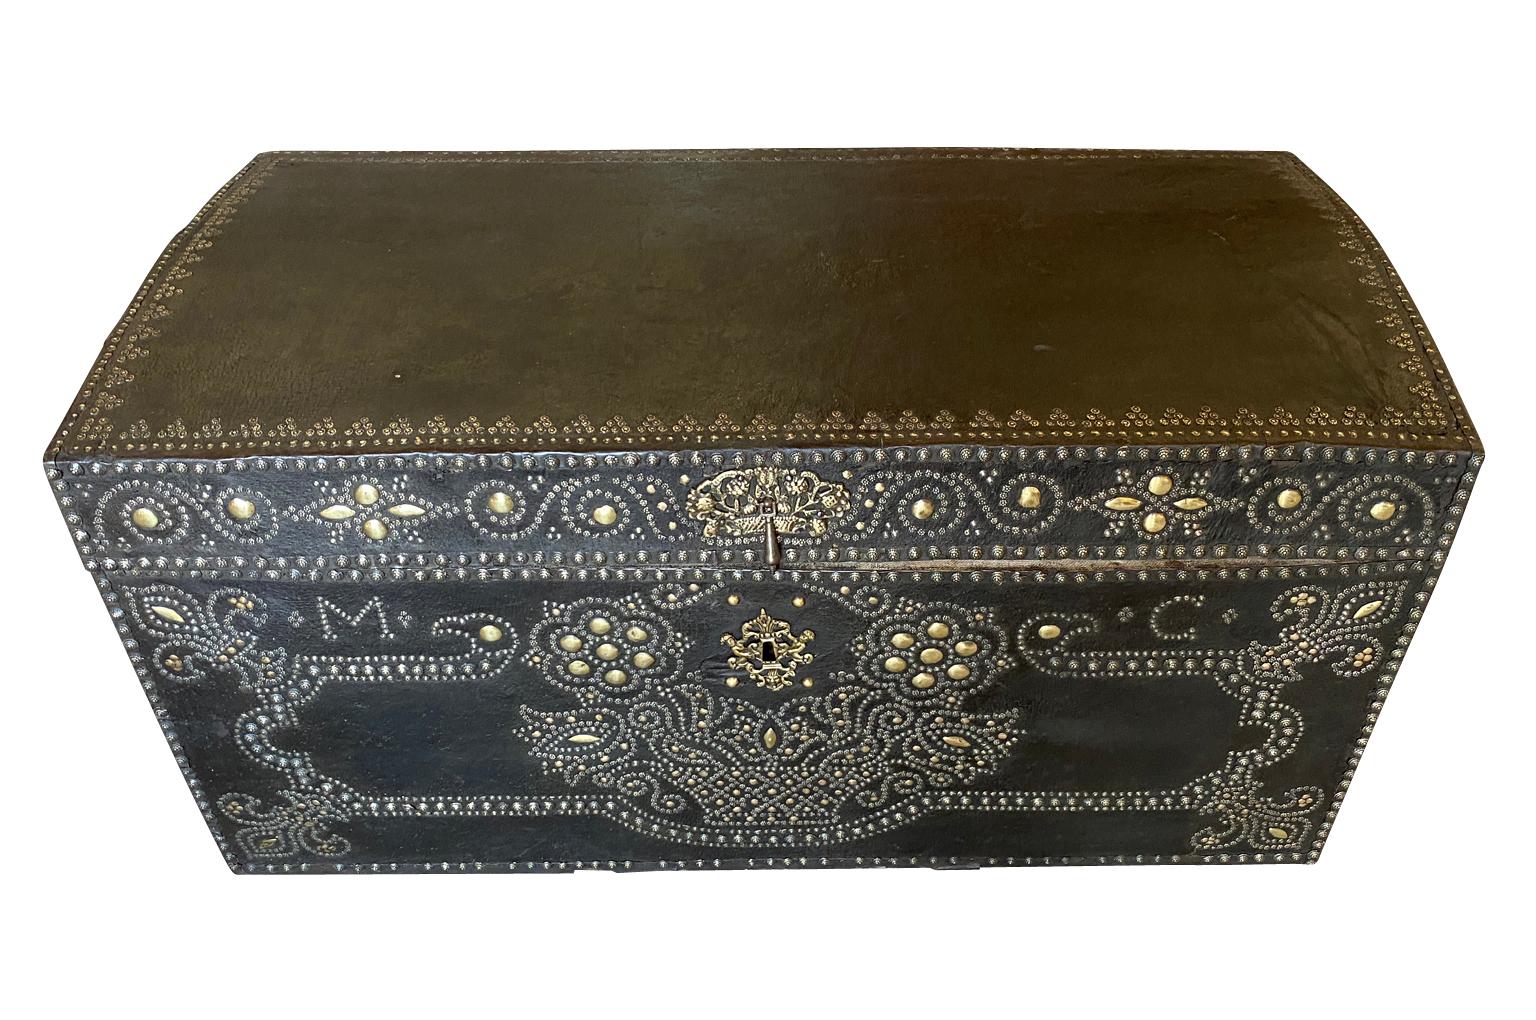 Exceptional French 17th Century Marriage Trunk In Good Condition For Sale In Atlanta, GA